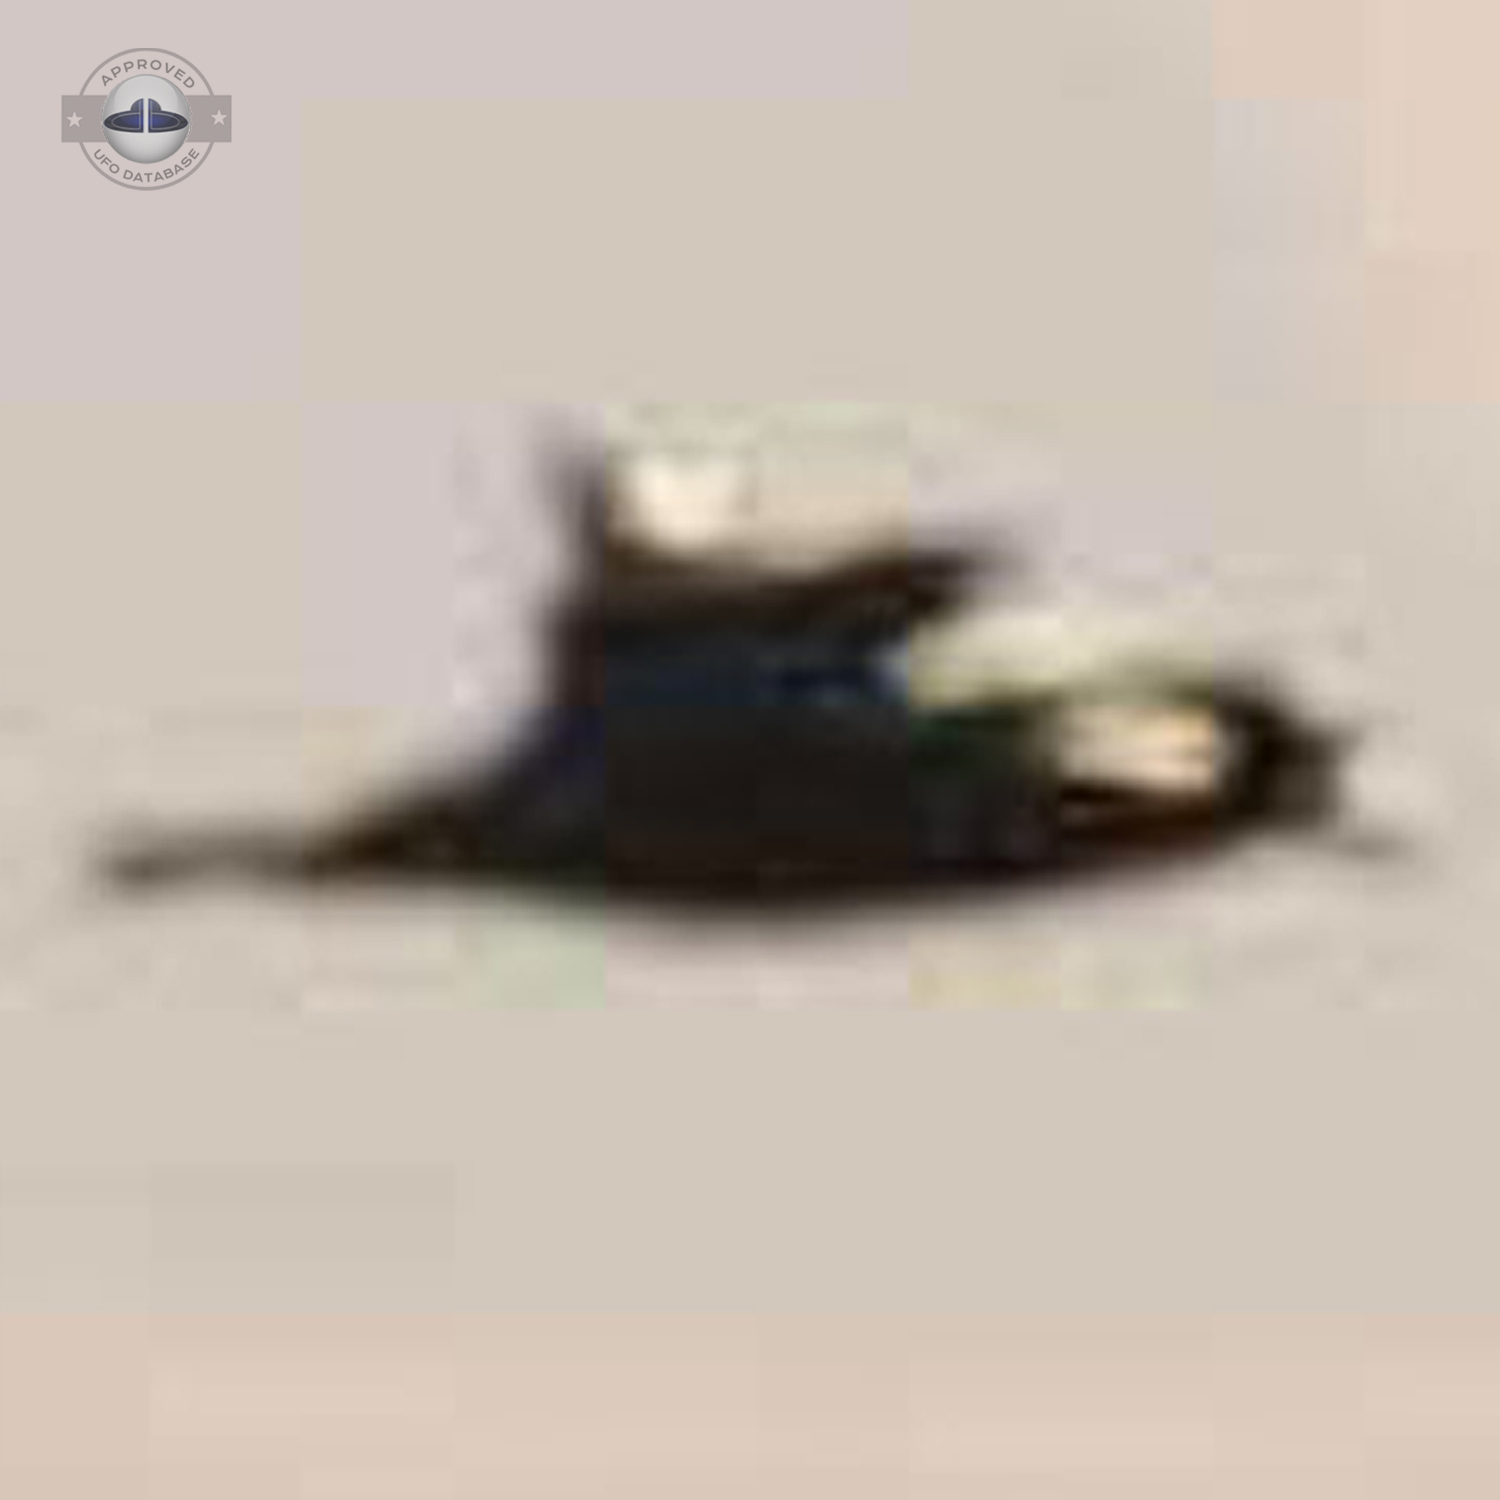 odd glow UFO making a whirling sound when passing by leaving glow UFO Picture #83-4